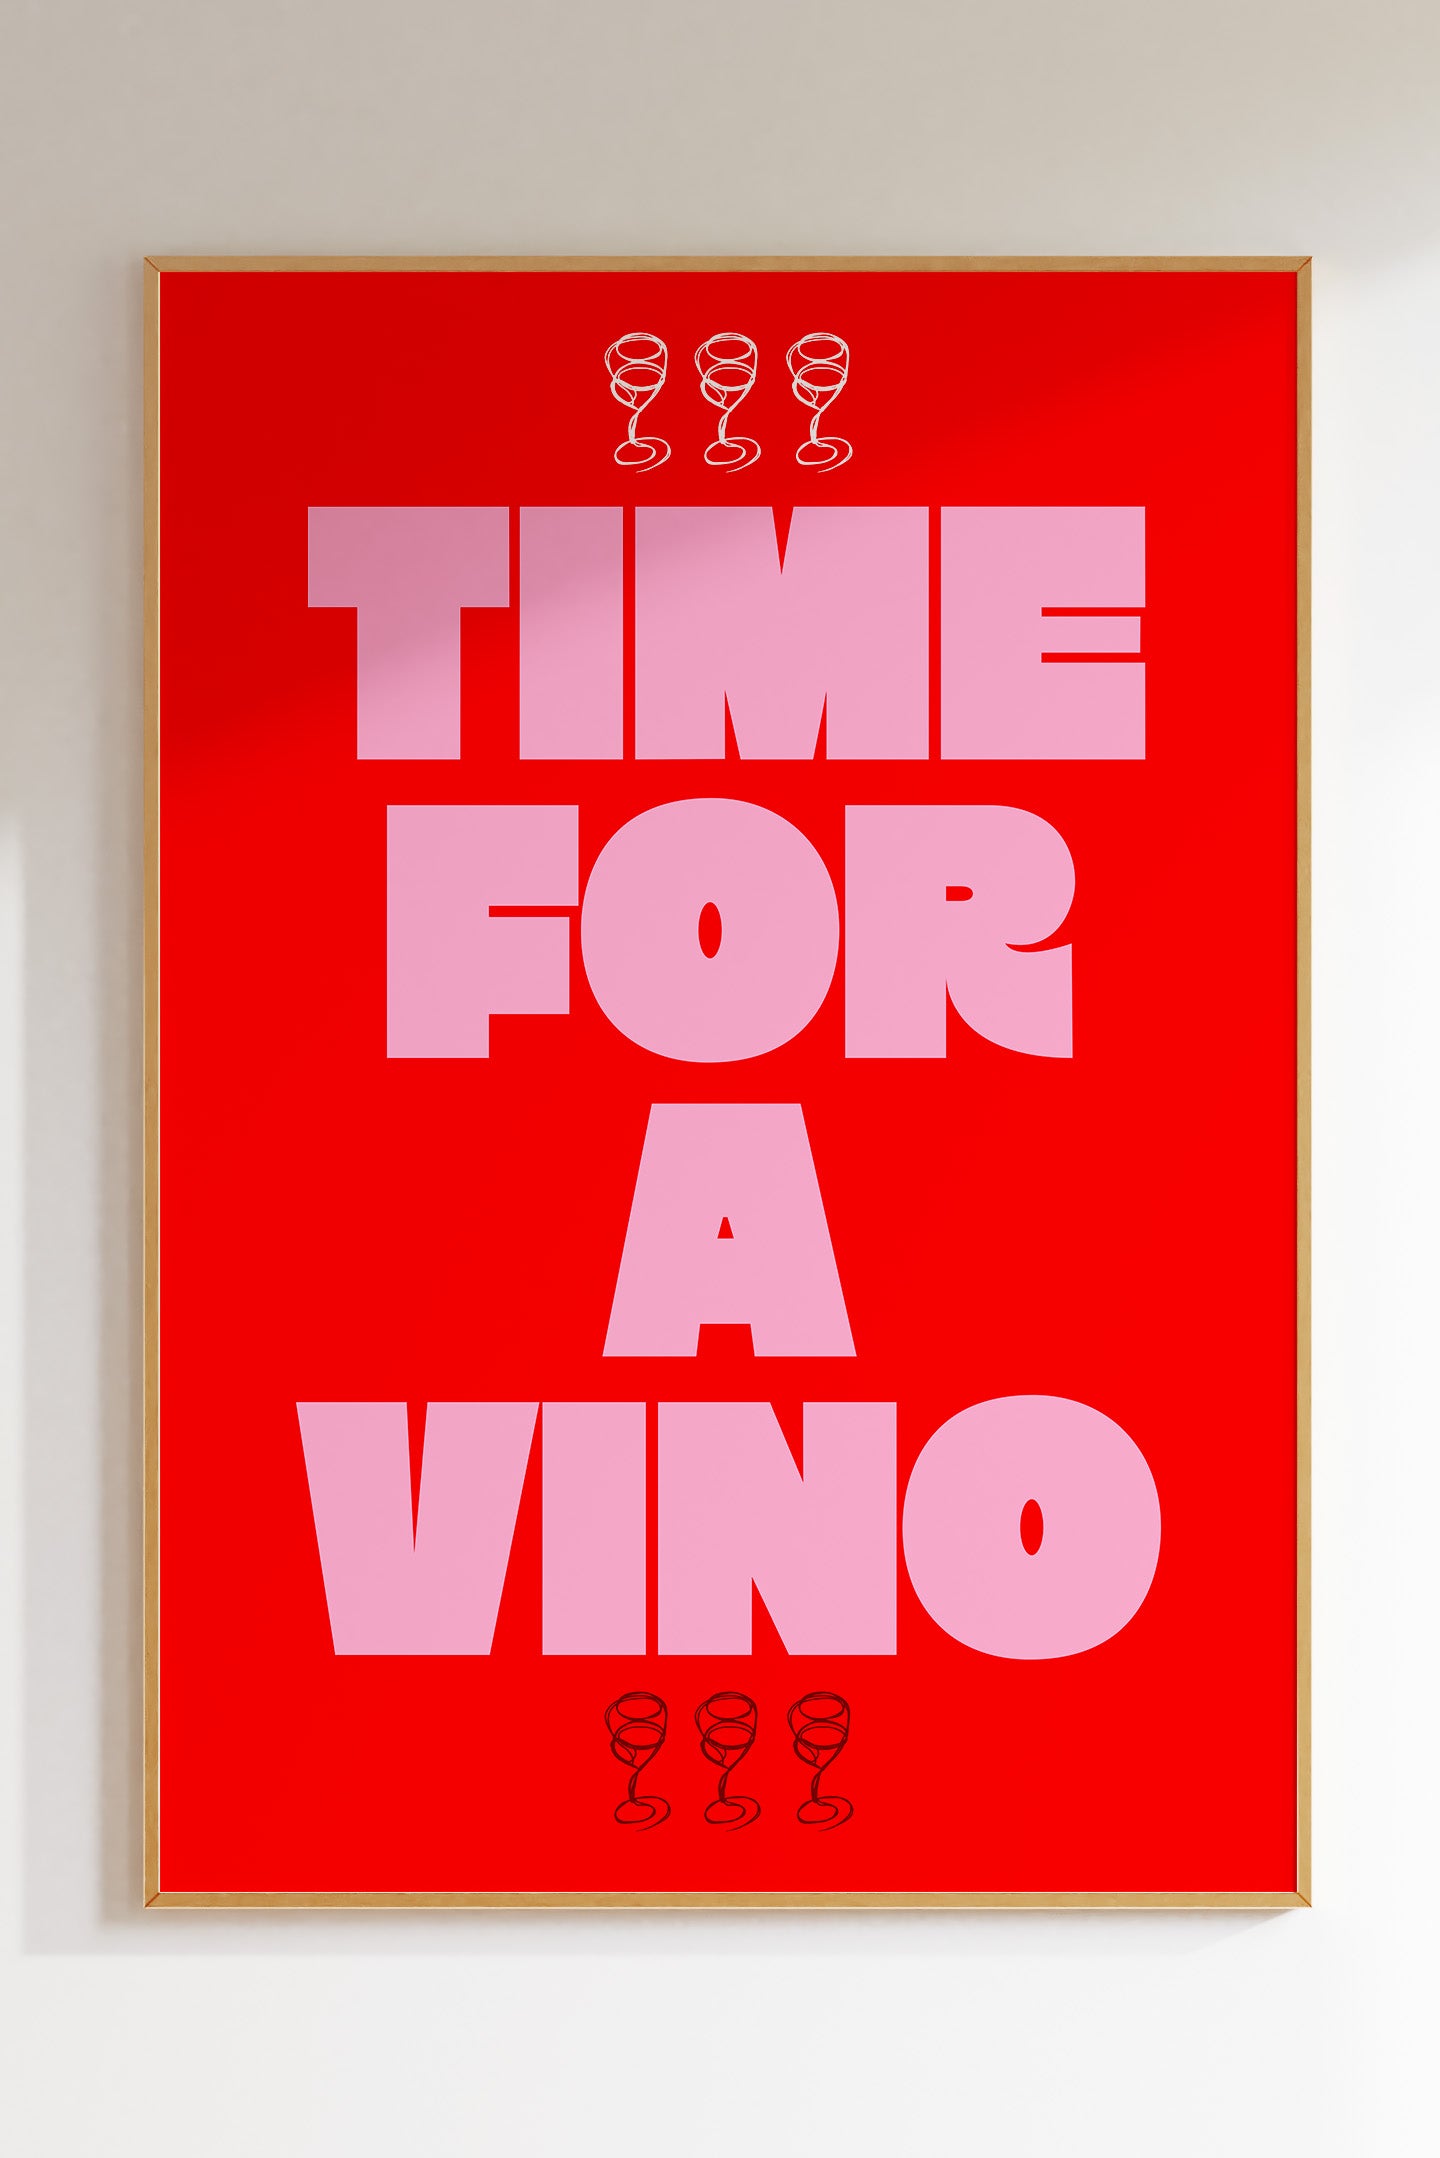 Time For A Vino (More Colours)